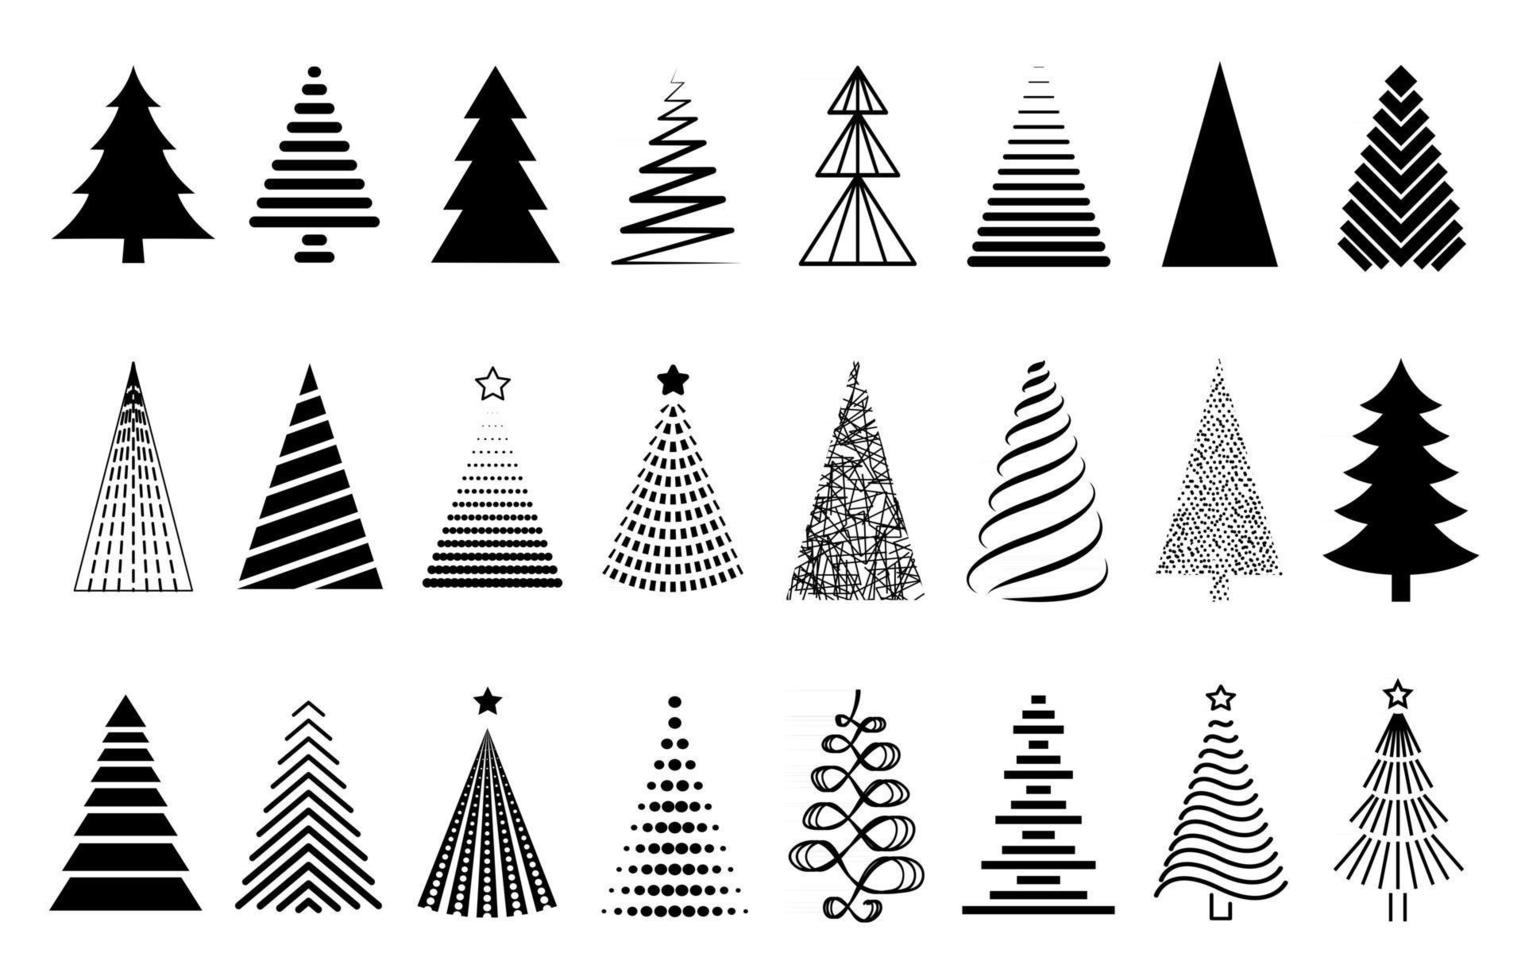 Vector black Christmas tree set. Collection of decorative stylized Christmas tree isolated on white background. Abstract decorations, design elements.